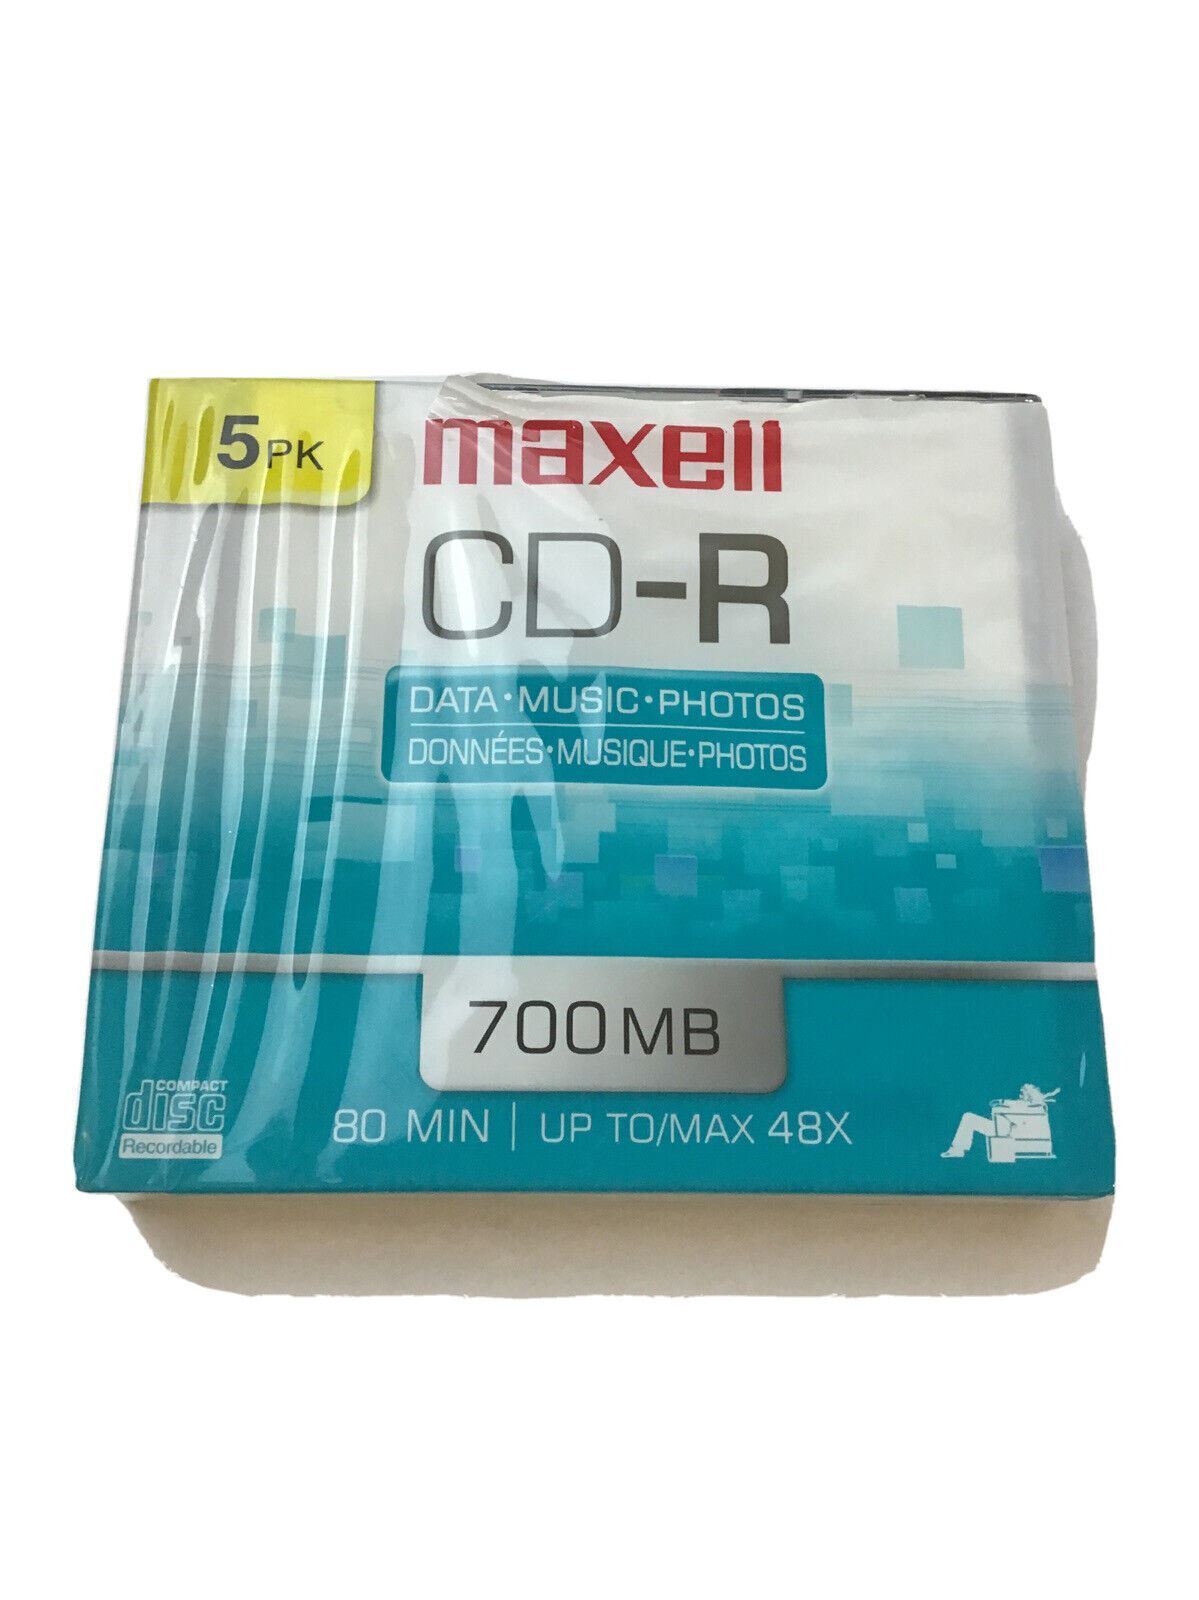 Maxell CD-R 700 MB Compact Disks For Data Music Photos, 5 Pack ~ NEW SEALED